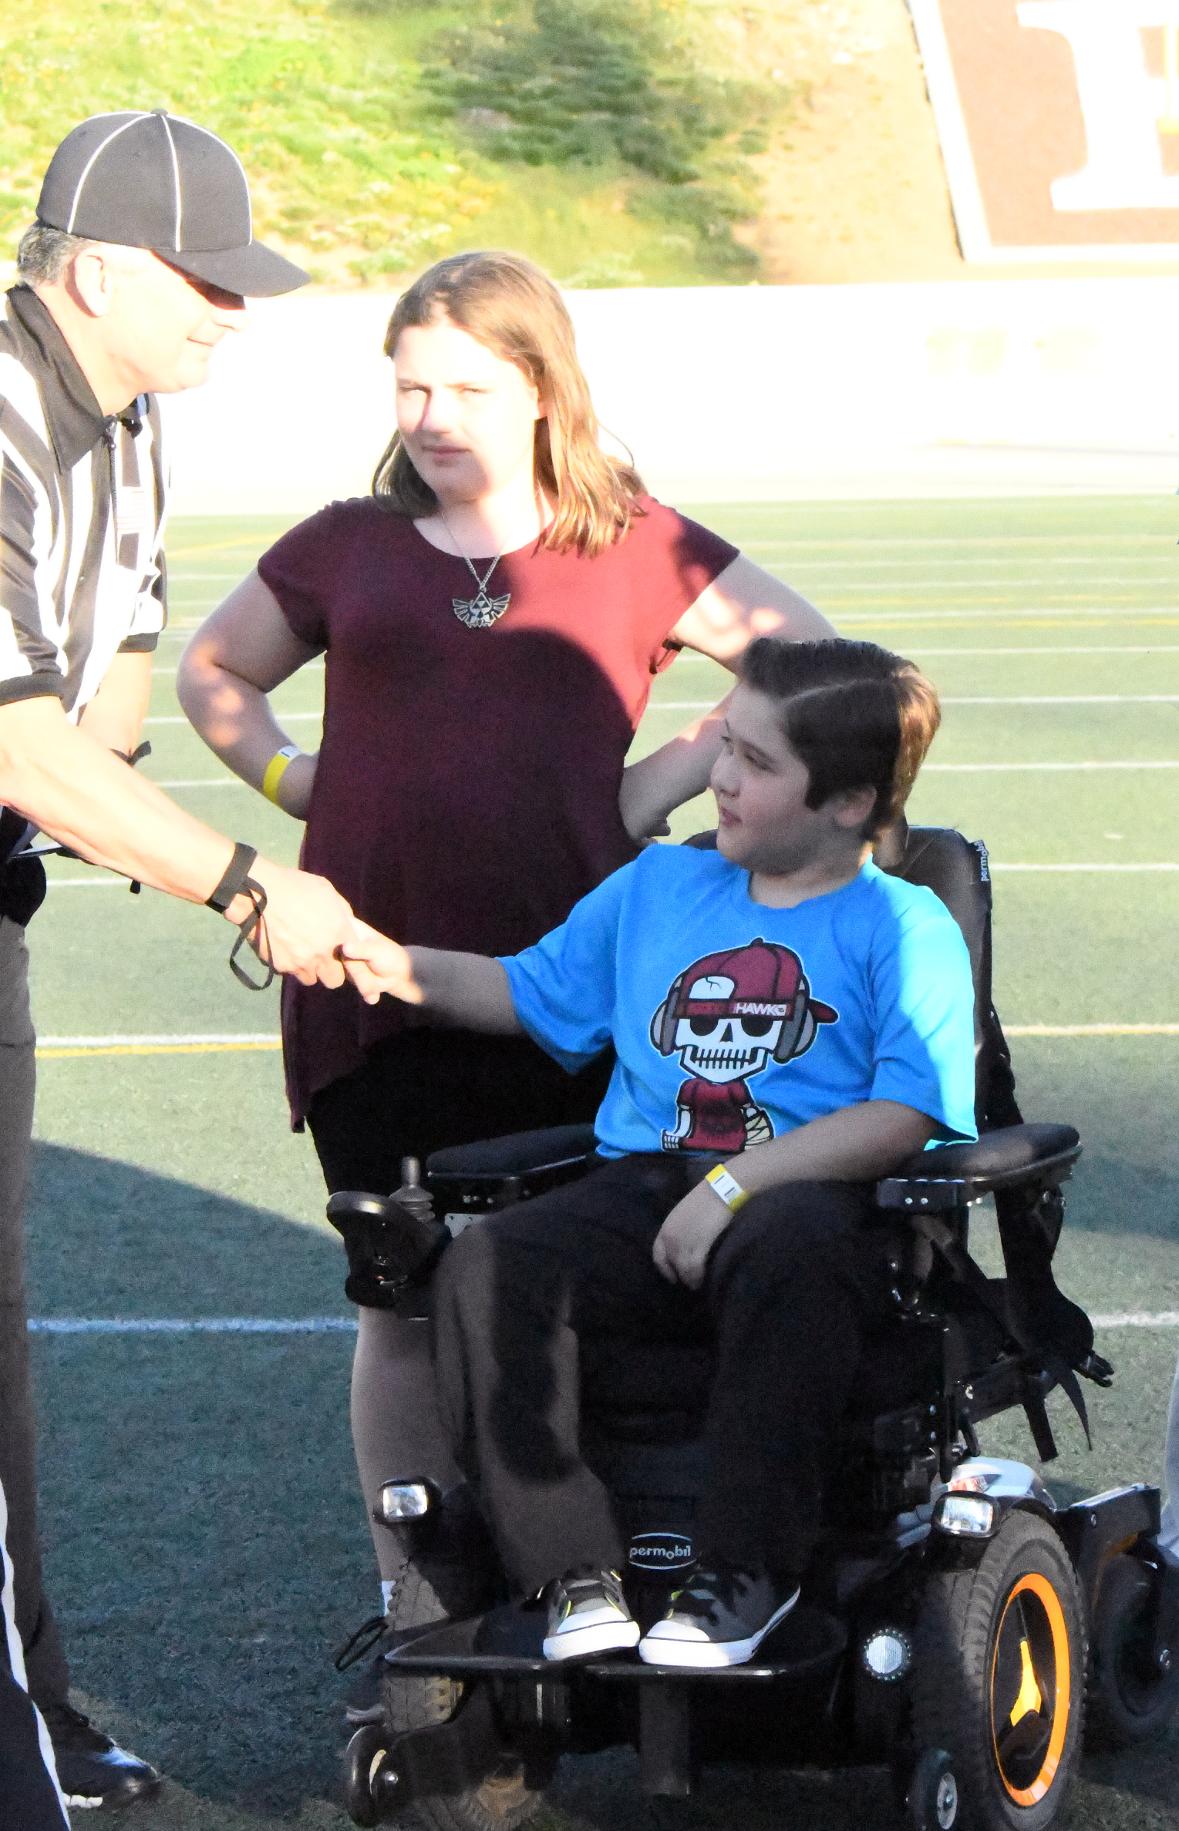 Avery Faeth is acknowledged at halftime at an East Los Angeles College football game on Sept. 24, 2016. Football coaches across America brought awareness to help defeat Duchenne Muscular Dystrophy for the Coach to Cure MD Program. (Photo by DeeDee Jackson)